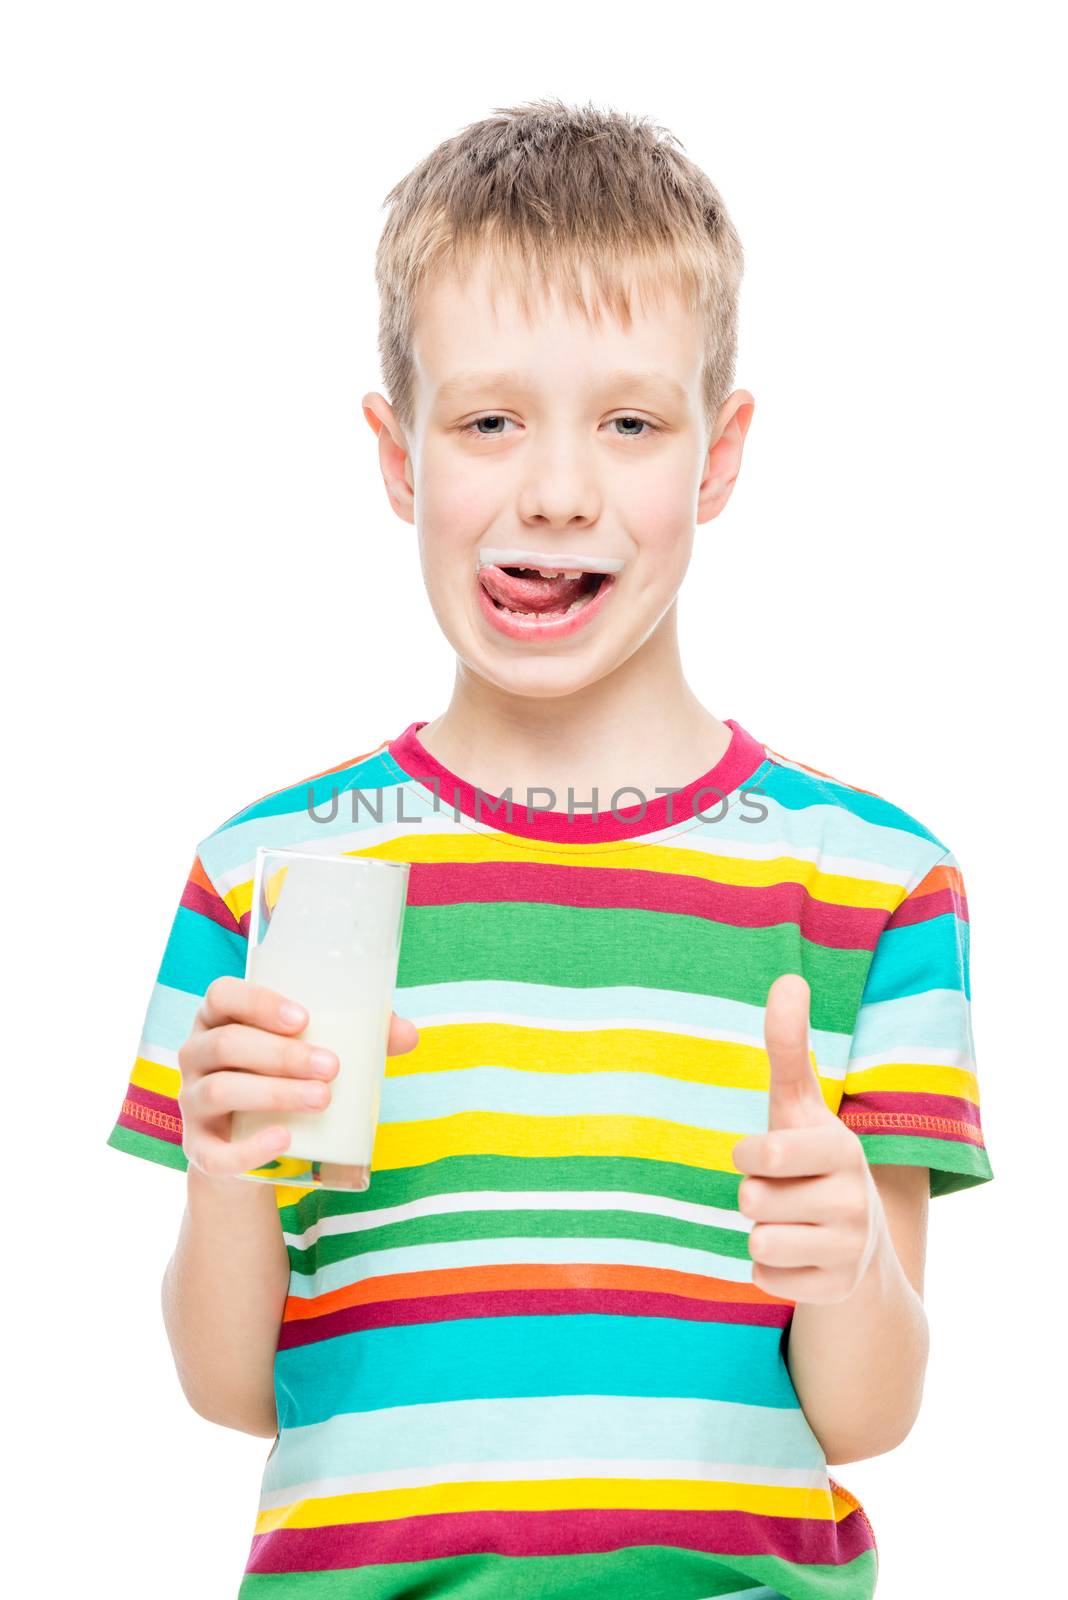 10-year-old boy and healthy tasty milk drink, portrait isolated